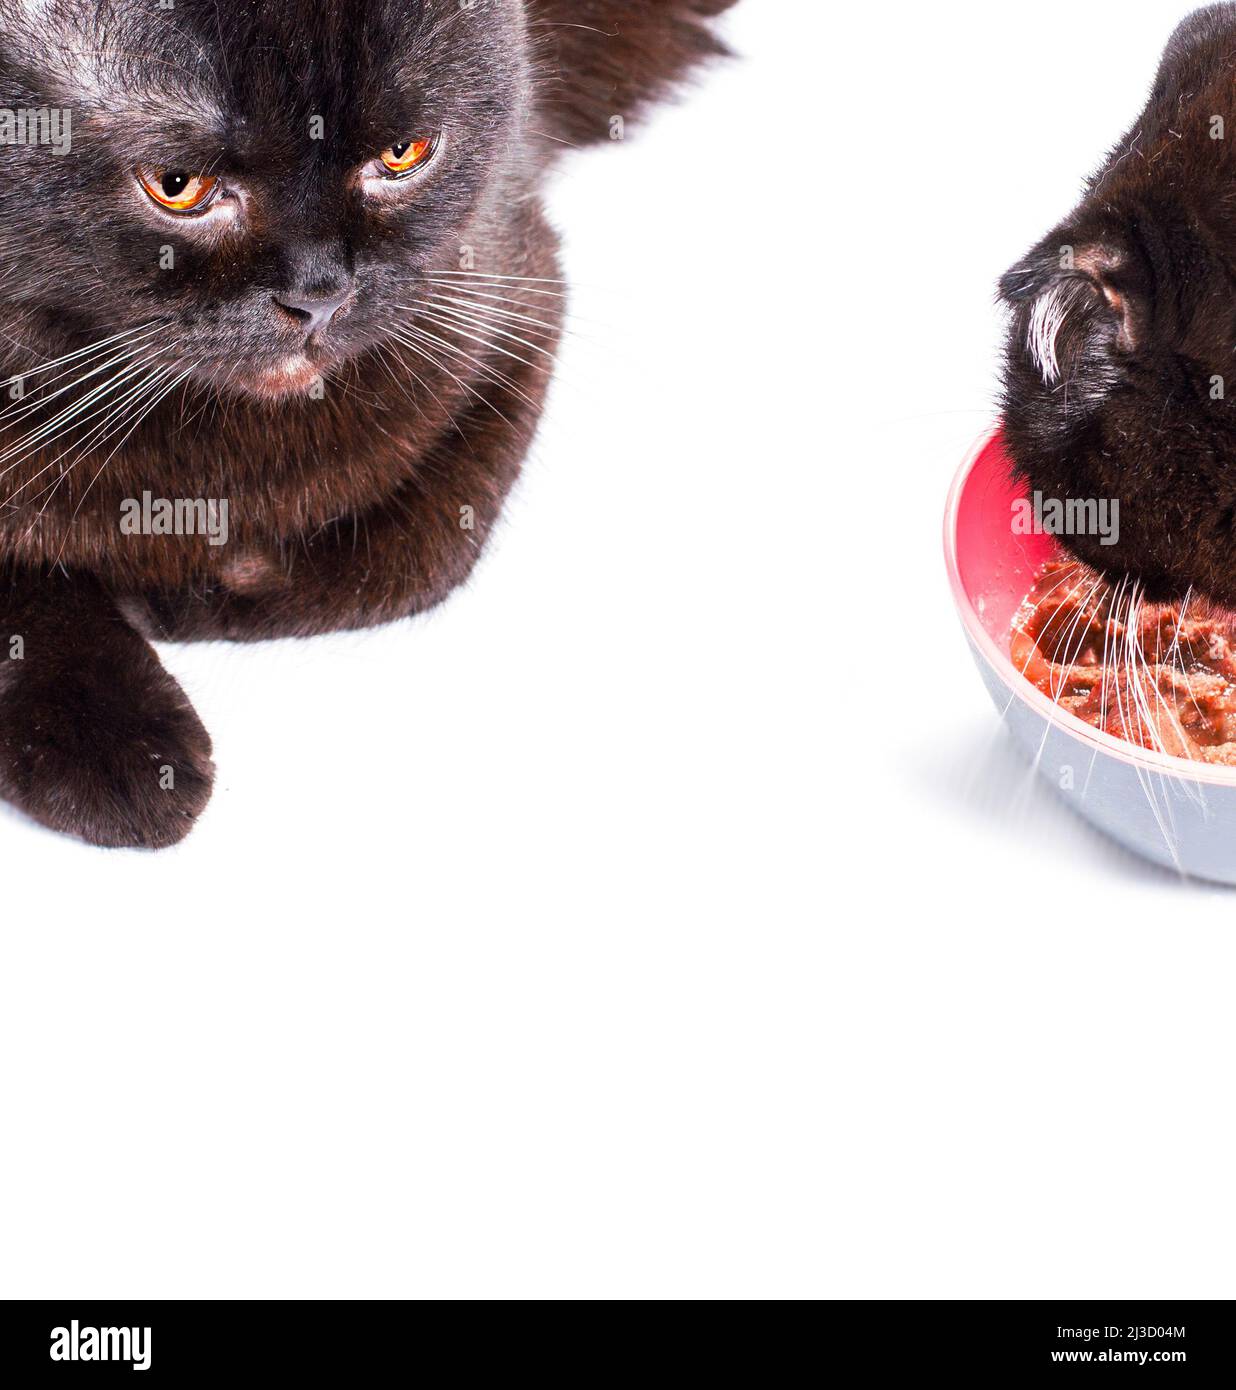 Scottish-British cats eating on a white background, isolated image, beautiful domestic cats, cats in the house, pets Stock Photo